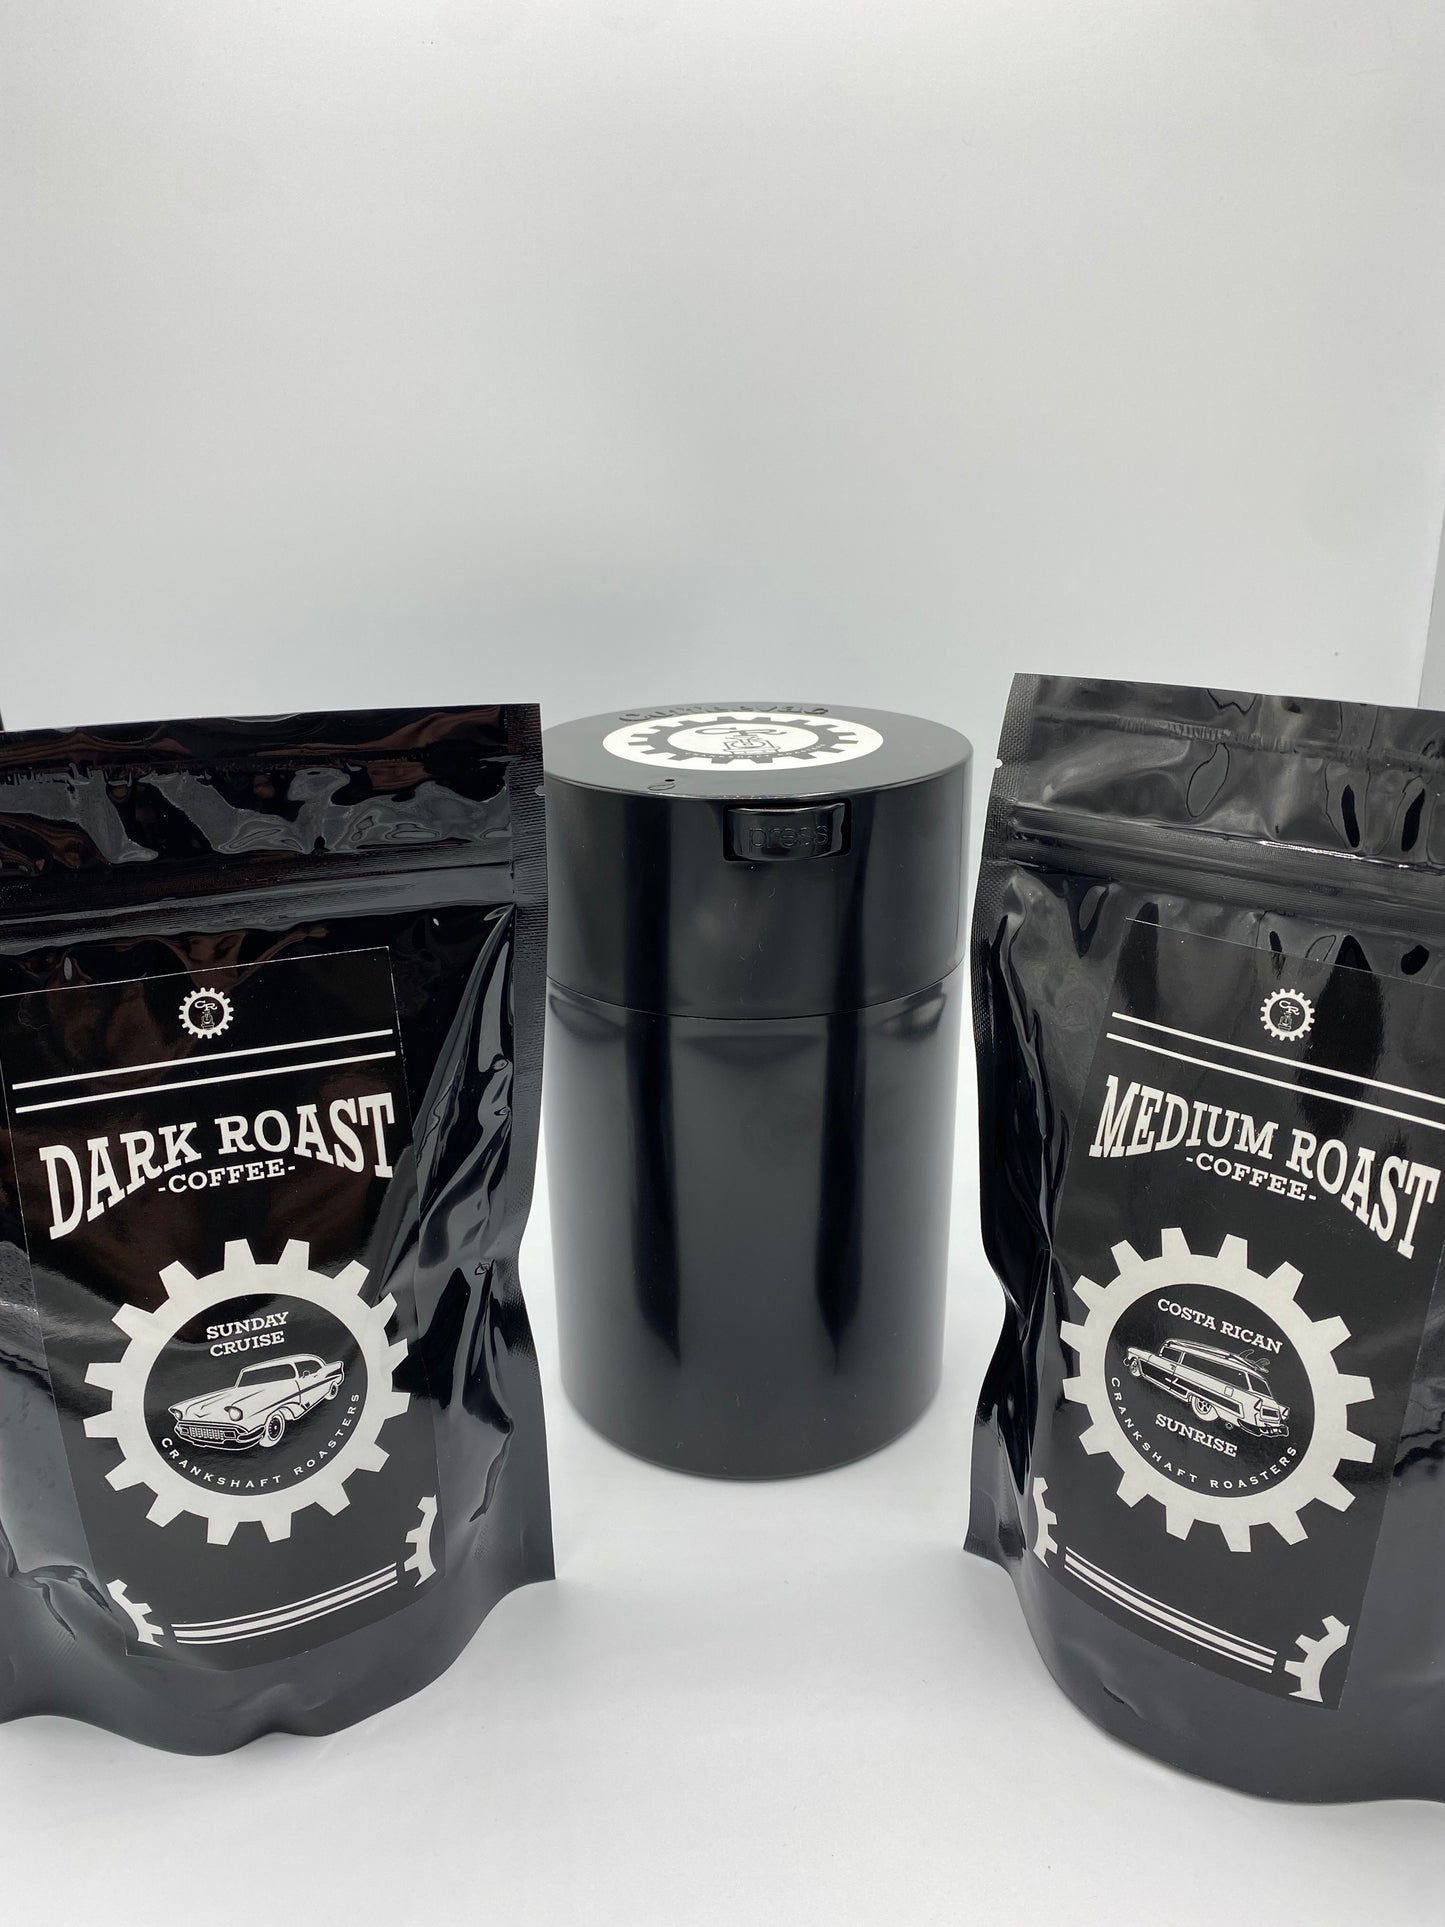 Coffee Canister for Ideal Freshness + FREE 12 oz of your choice